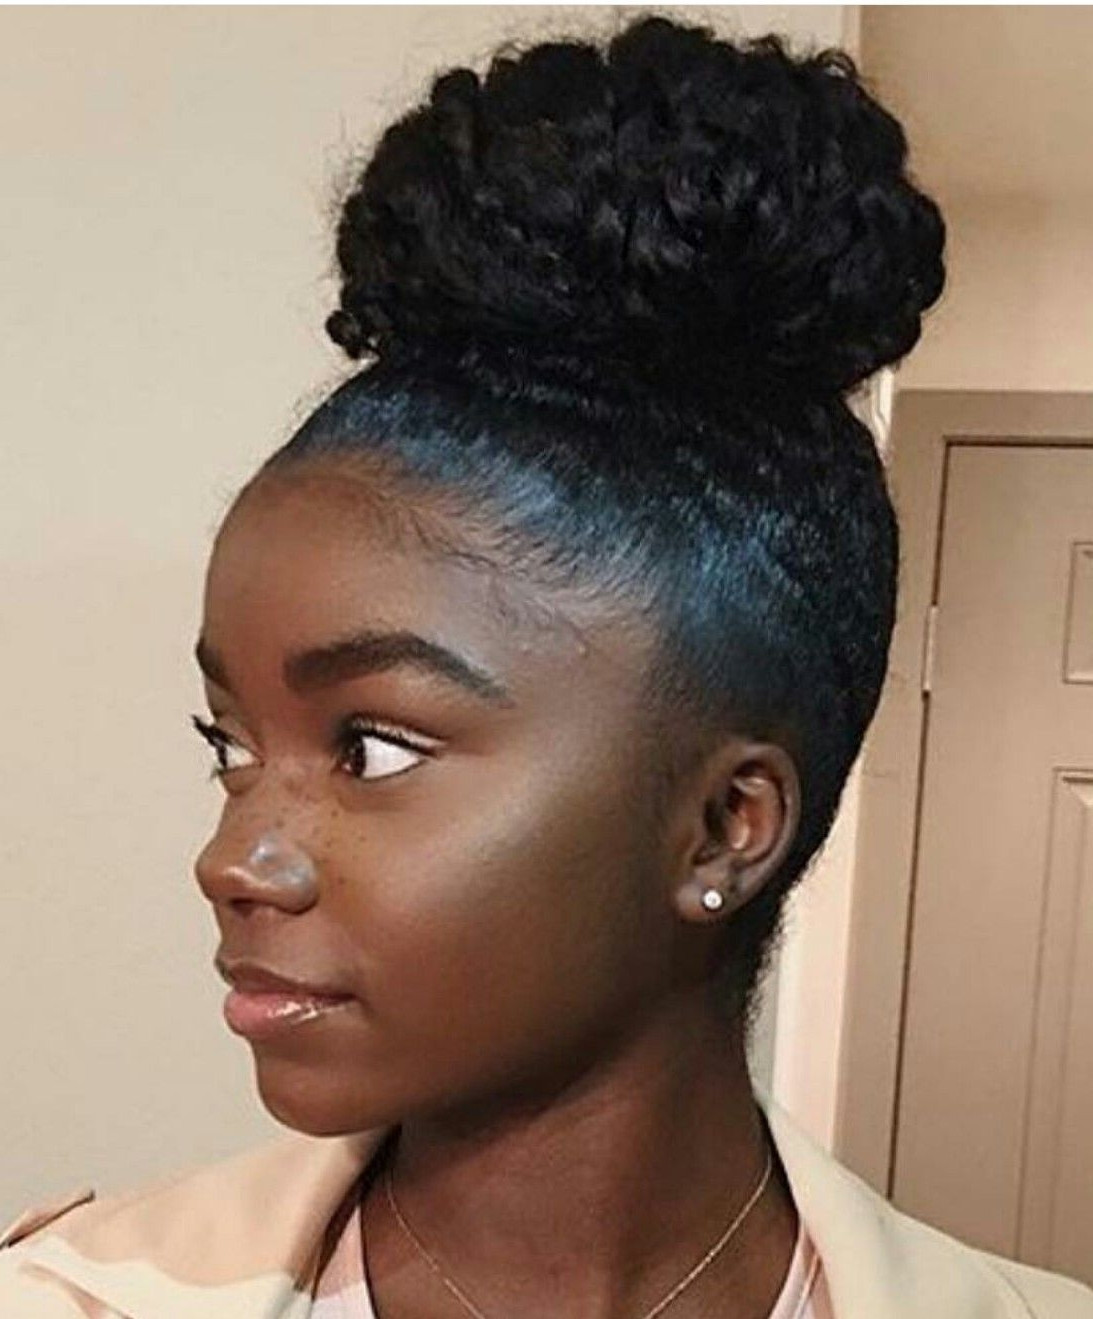 Updo Hairstyles For Natural Black Hair
 2019 Latest Natural Updo Hairstyles For Black Hair